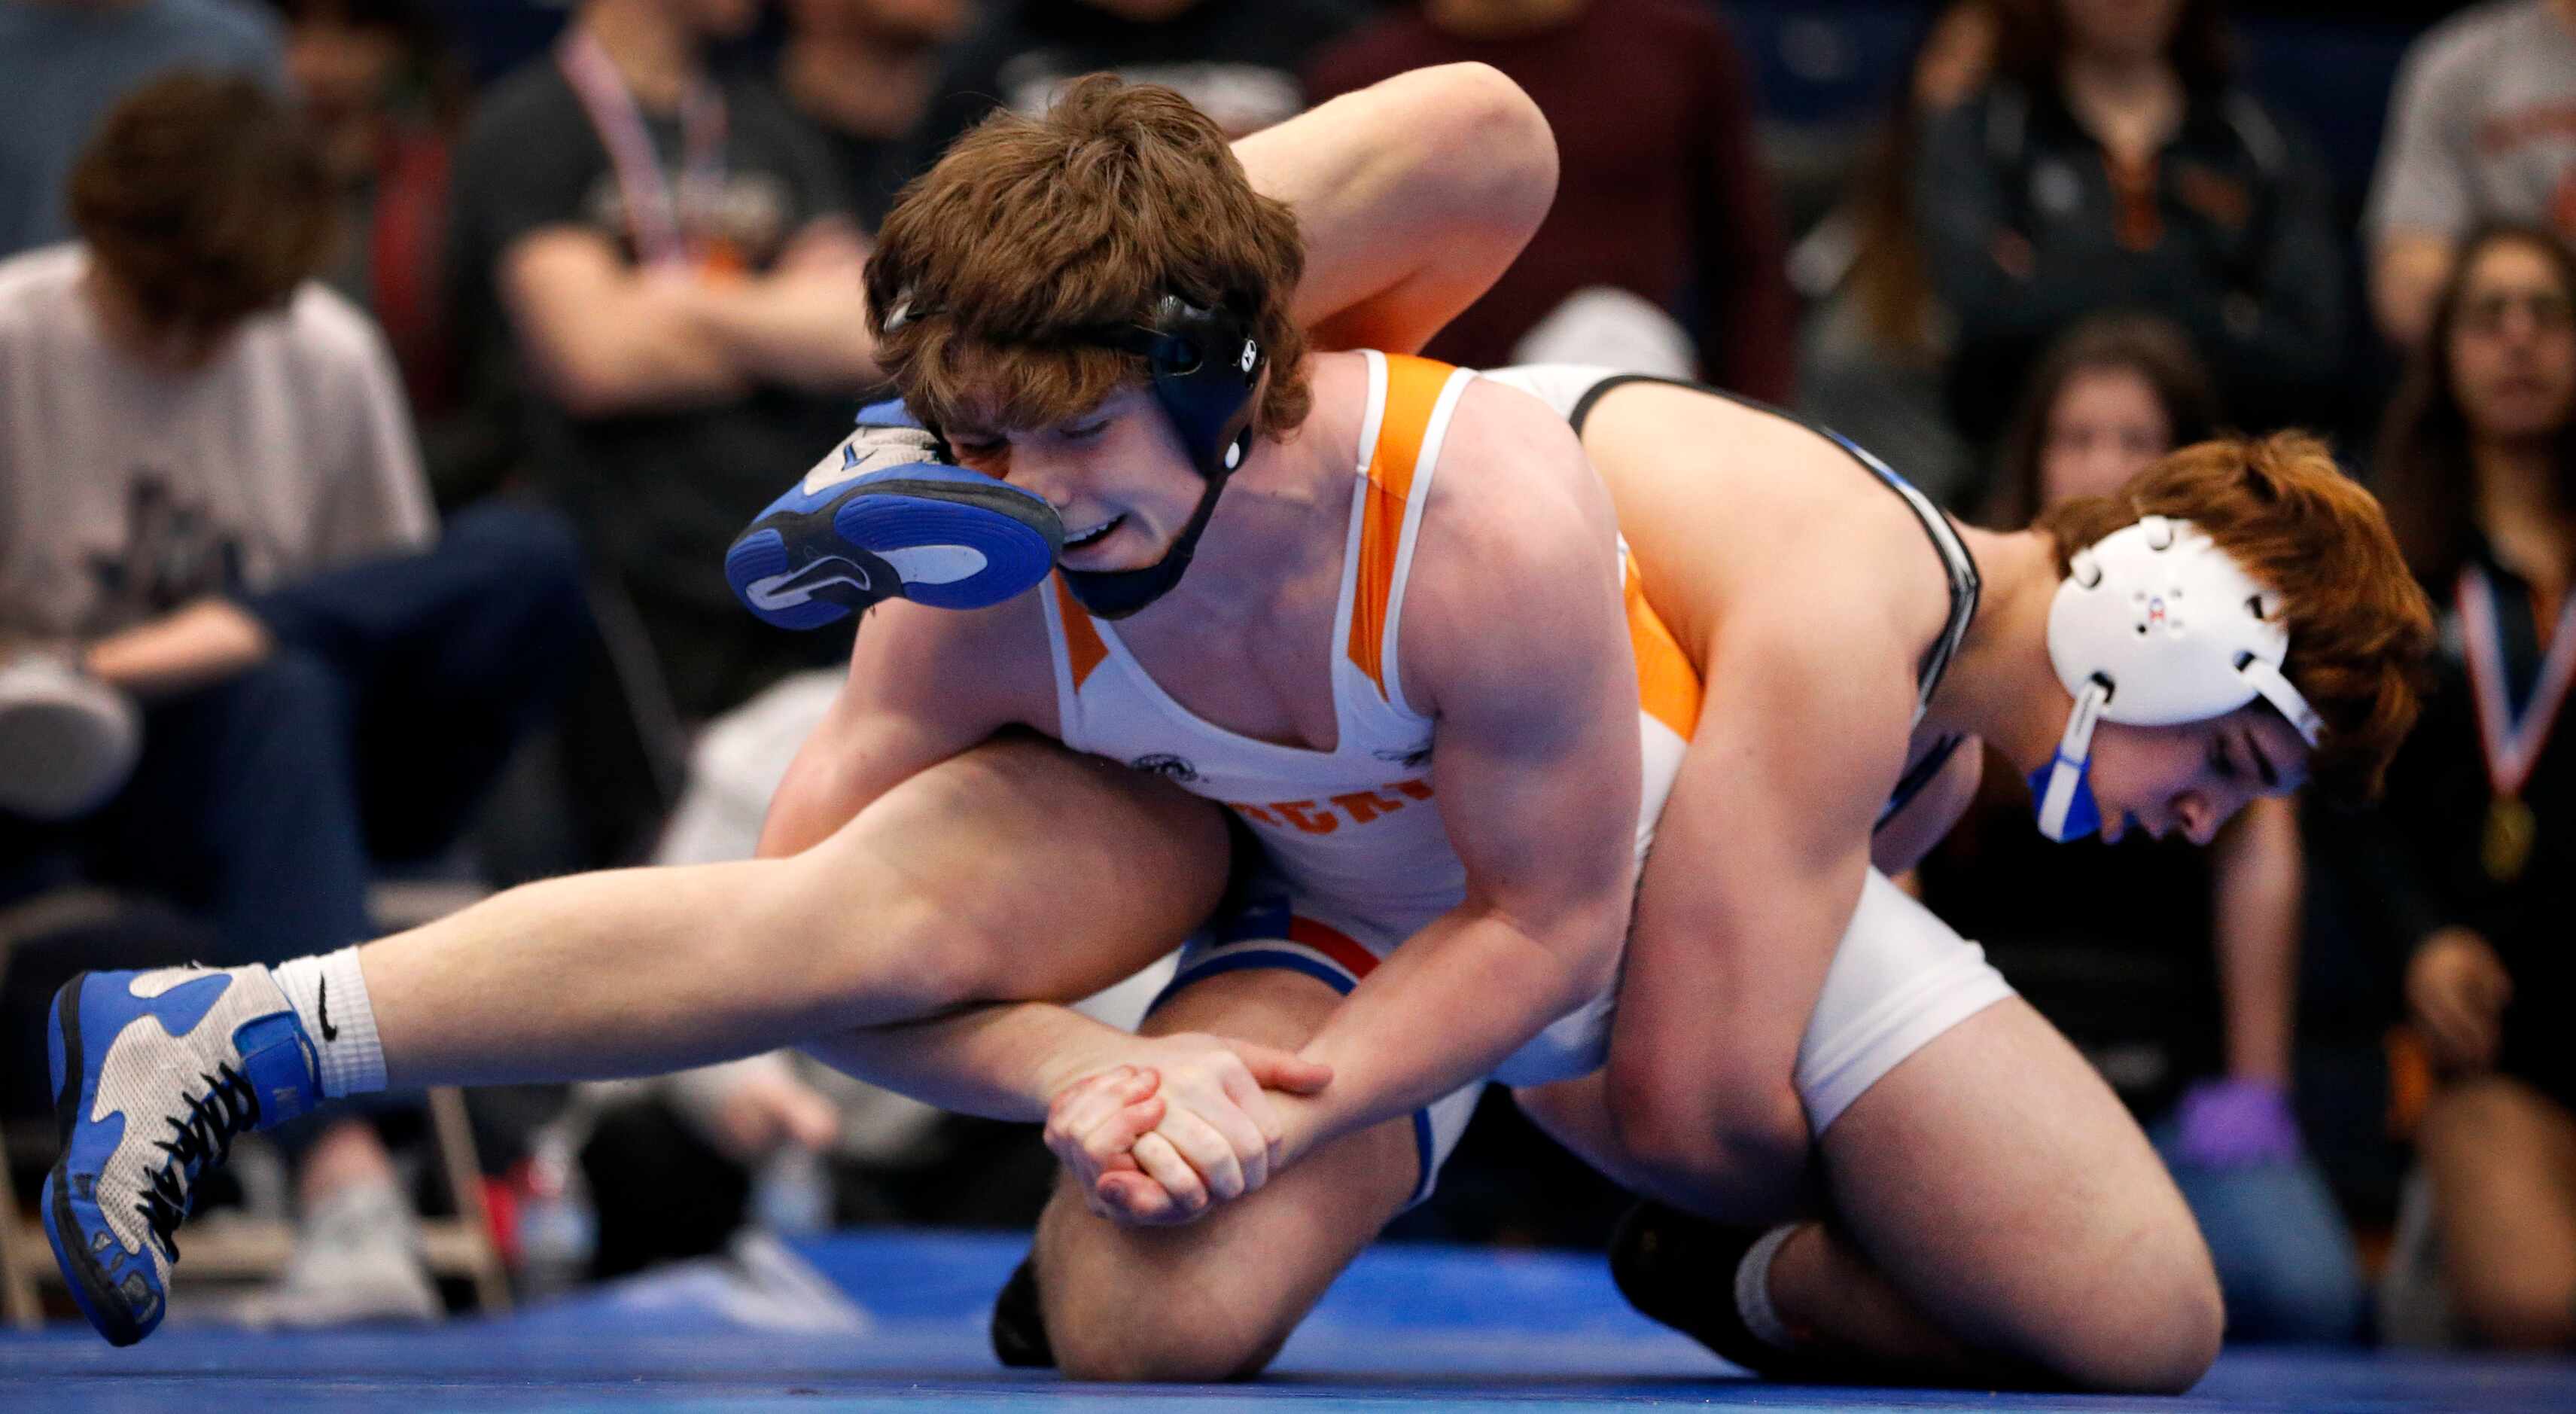 Rockwall High wrestler Bryce Milster (facing) takes a foot to the nose by Plano West's Plano...